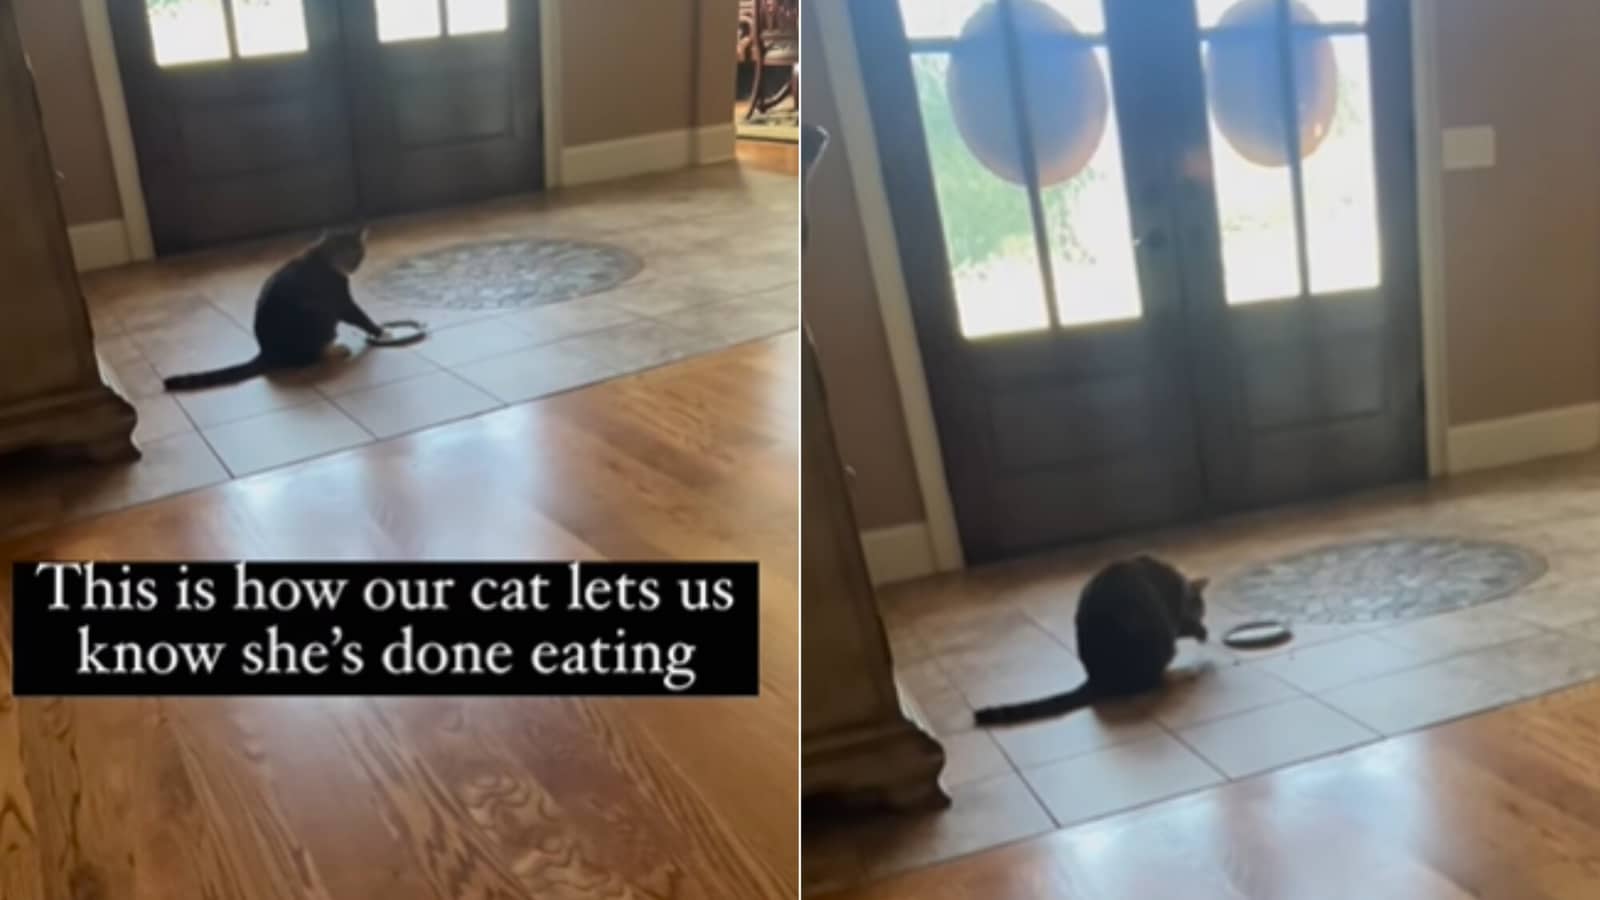 Sassy cat has a special way of informing that she has finished eating. Watch